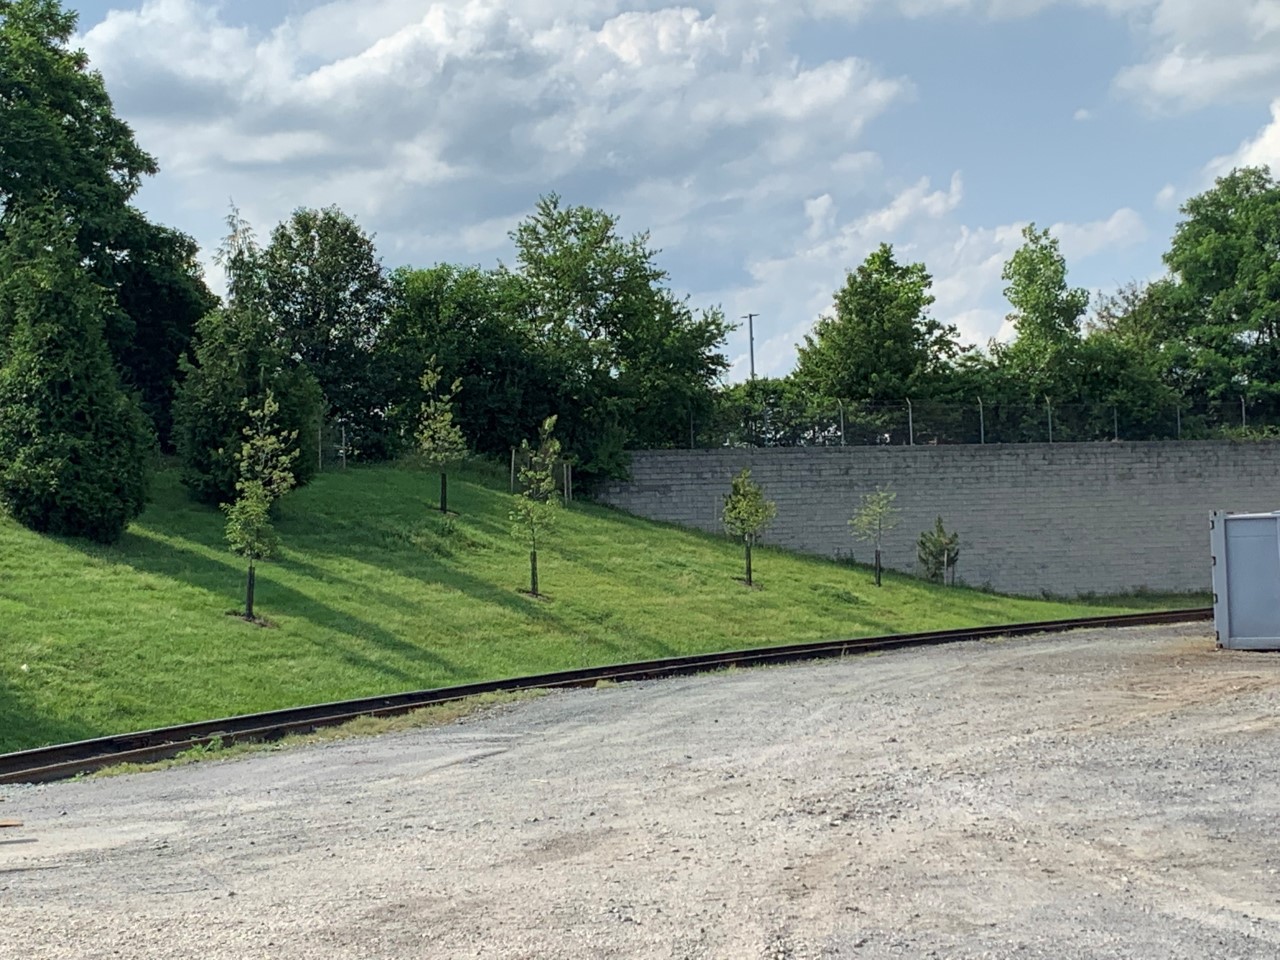 Montgomery County Marks the 40th Anniversary of Shady Grove Transfer Station by Beautifying Its Landscape with 33 New Shade Trees